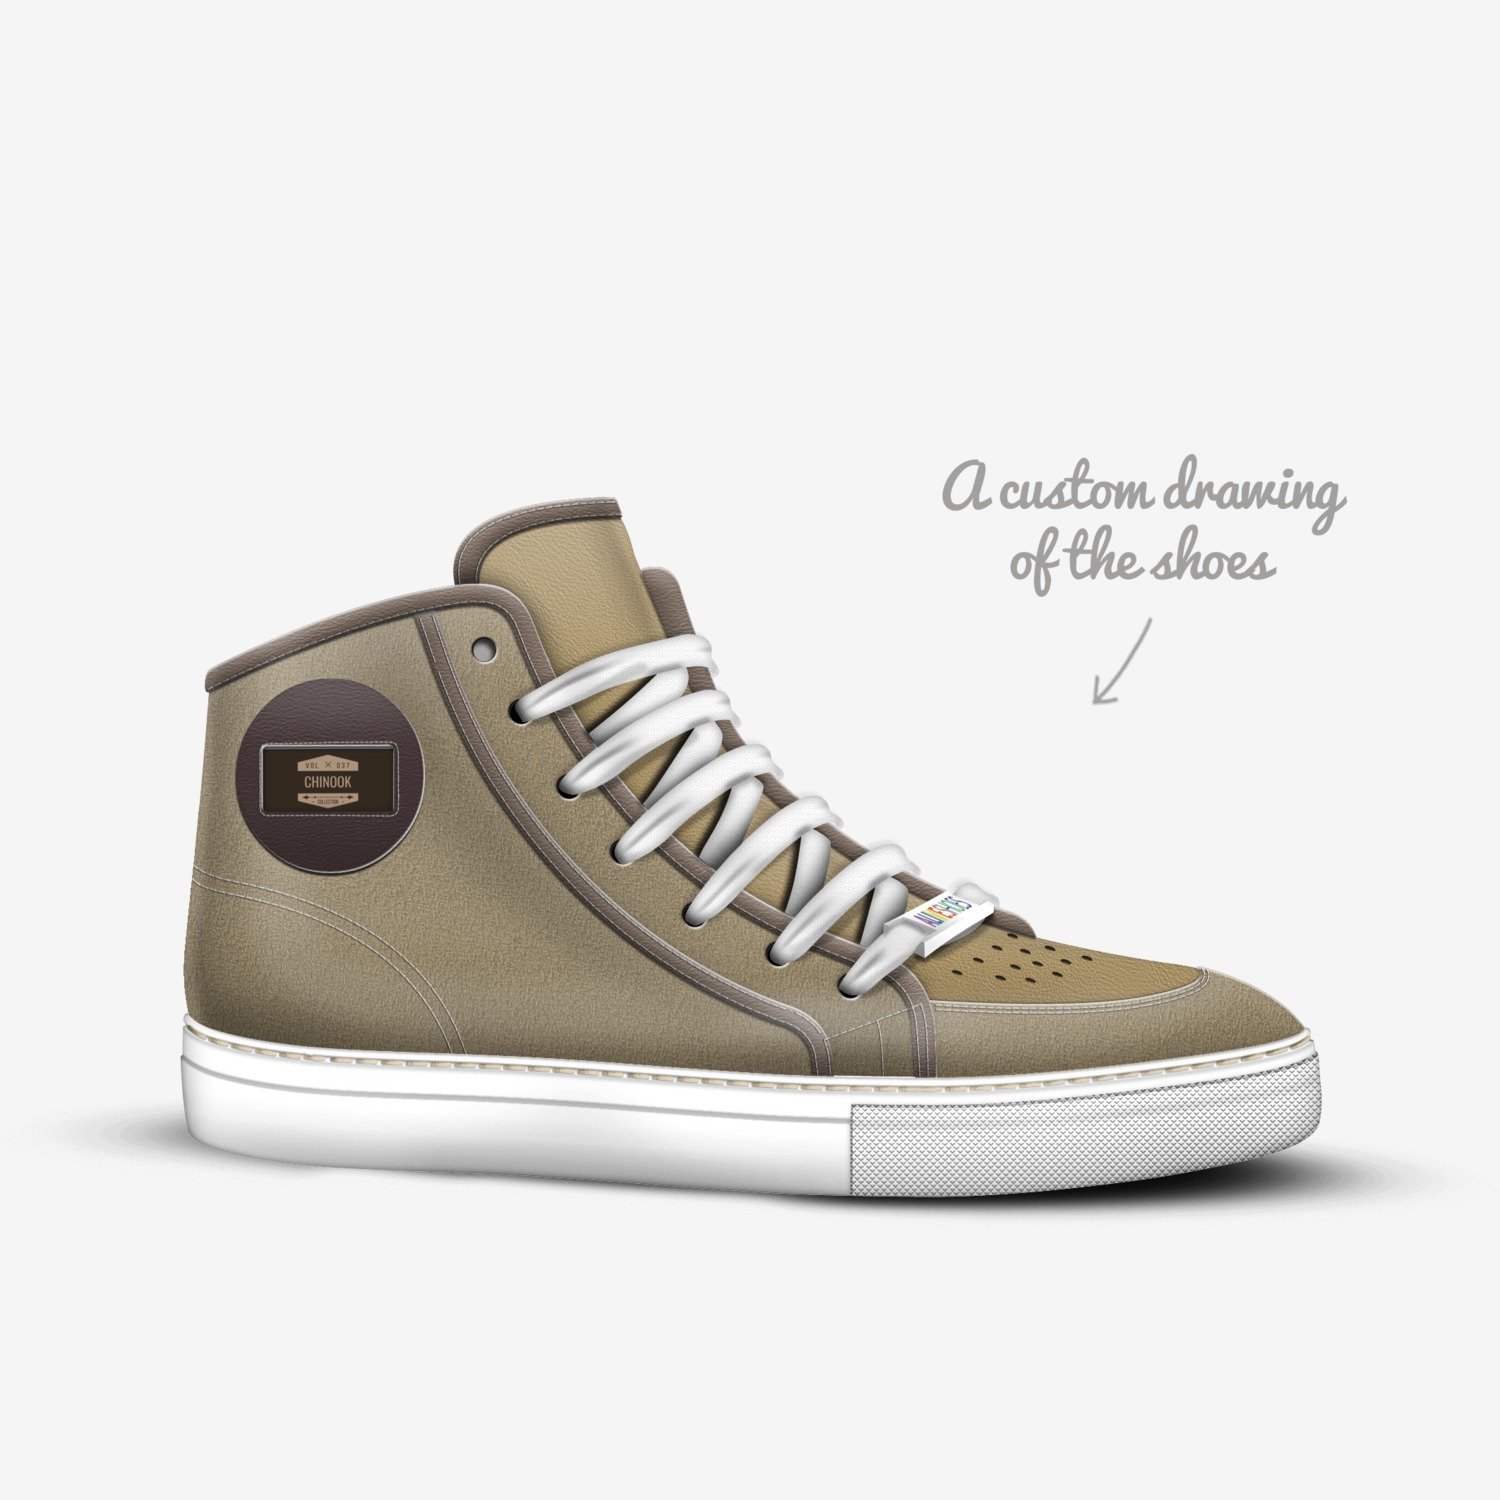 Chinook | A Custom Shoe concept by Danny Chambers